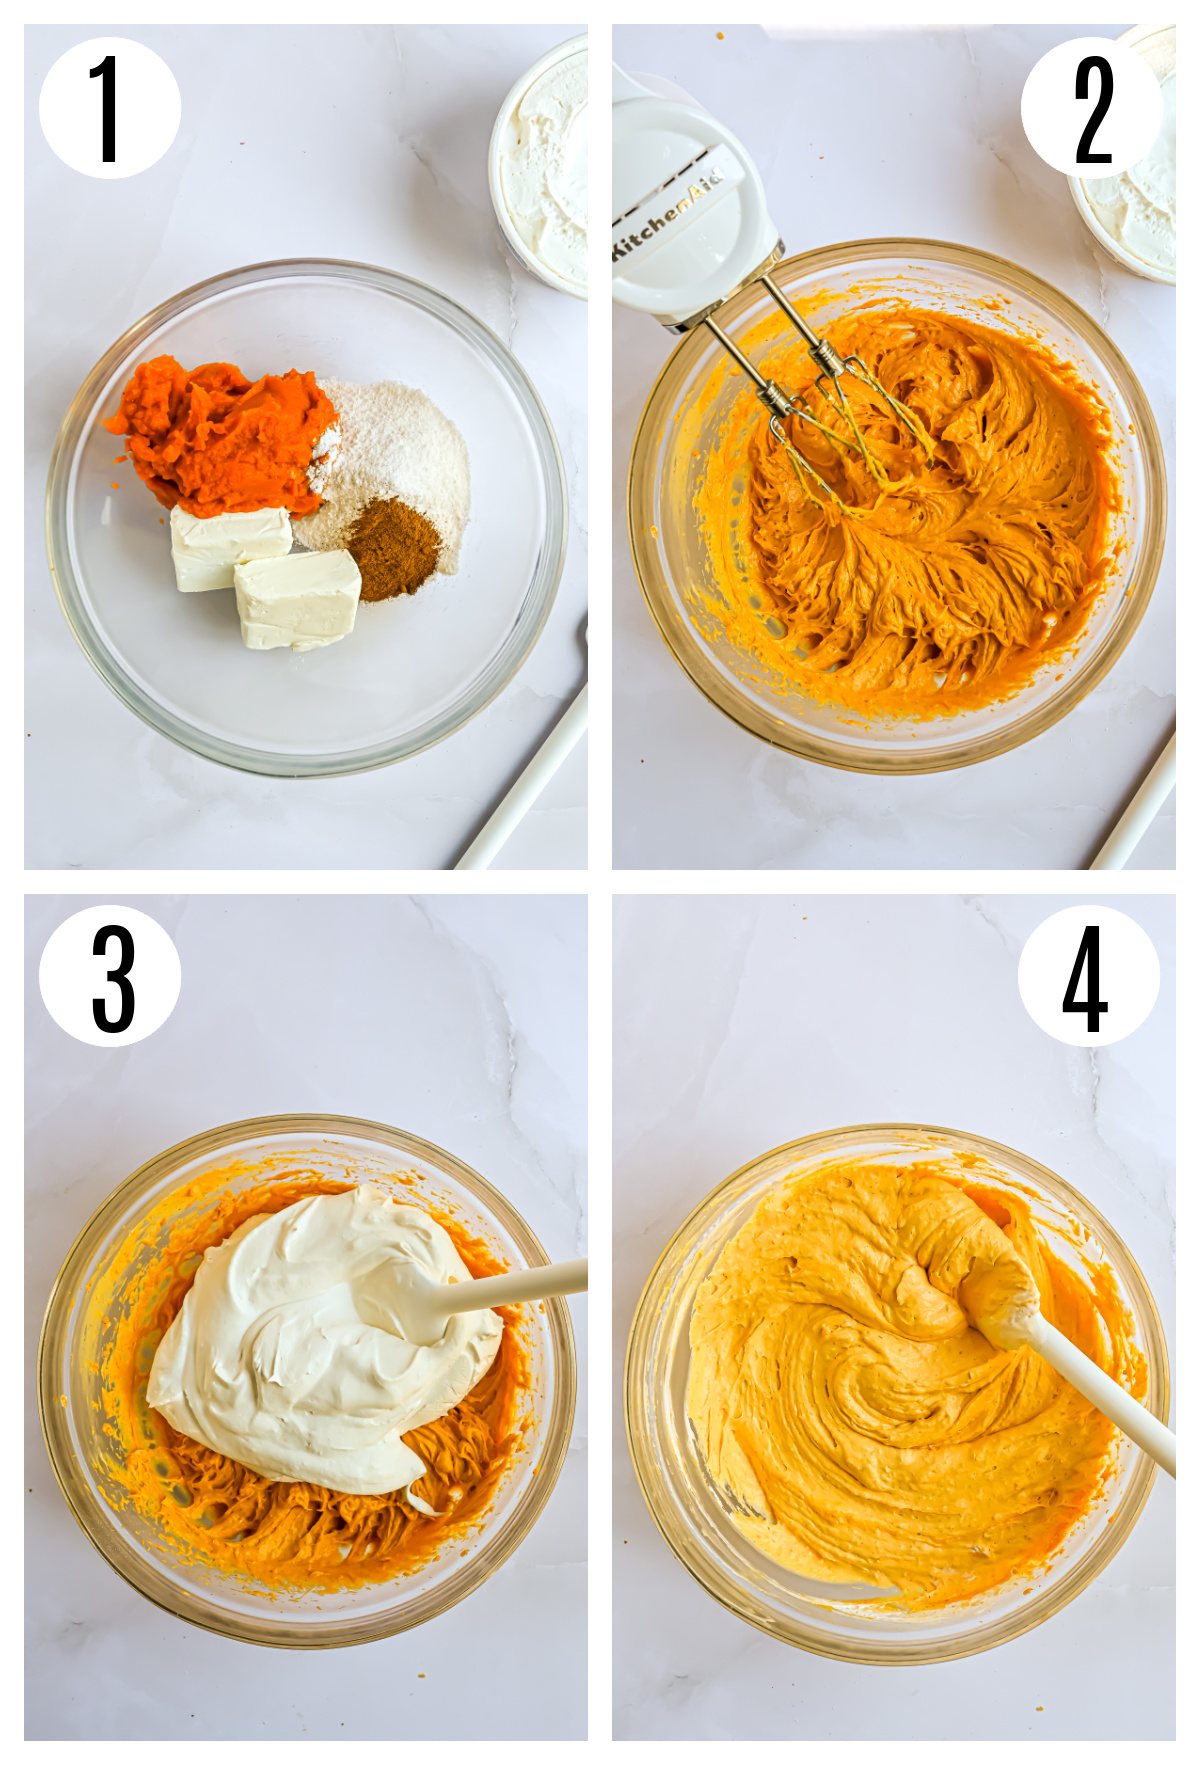 The steps to make the pumpkin fluff recipe include adding all the ingredients, except the cool whip, to a large mixing bowl, blending them with a hand mixer and then folding in the cool whip.